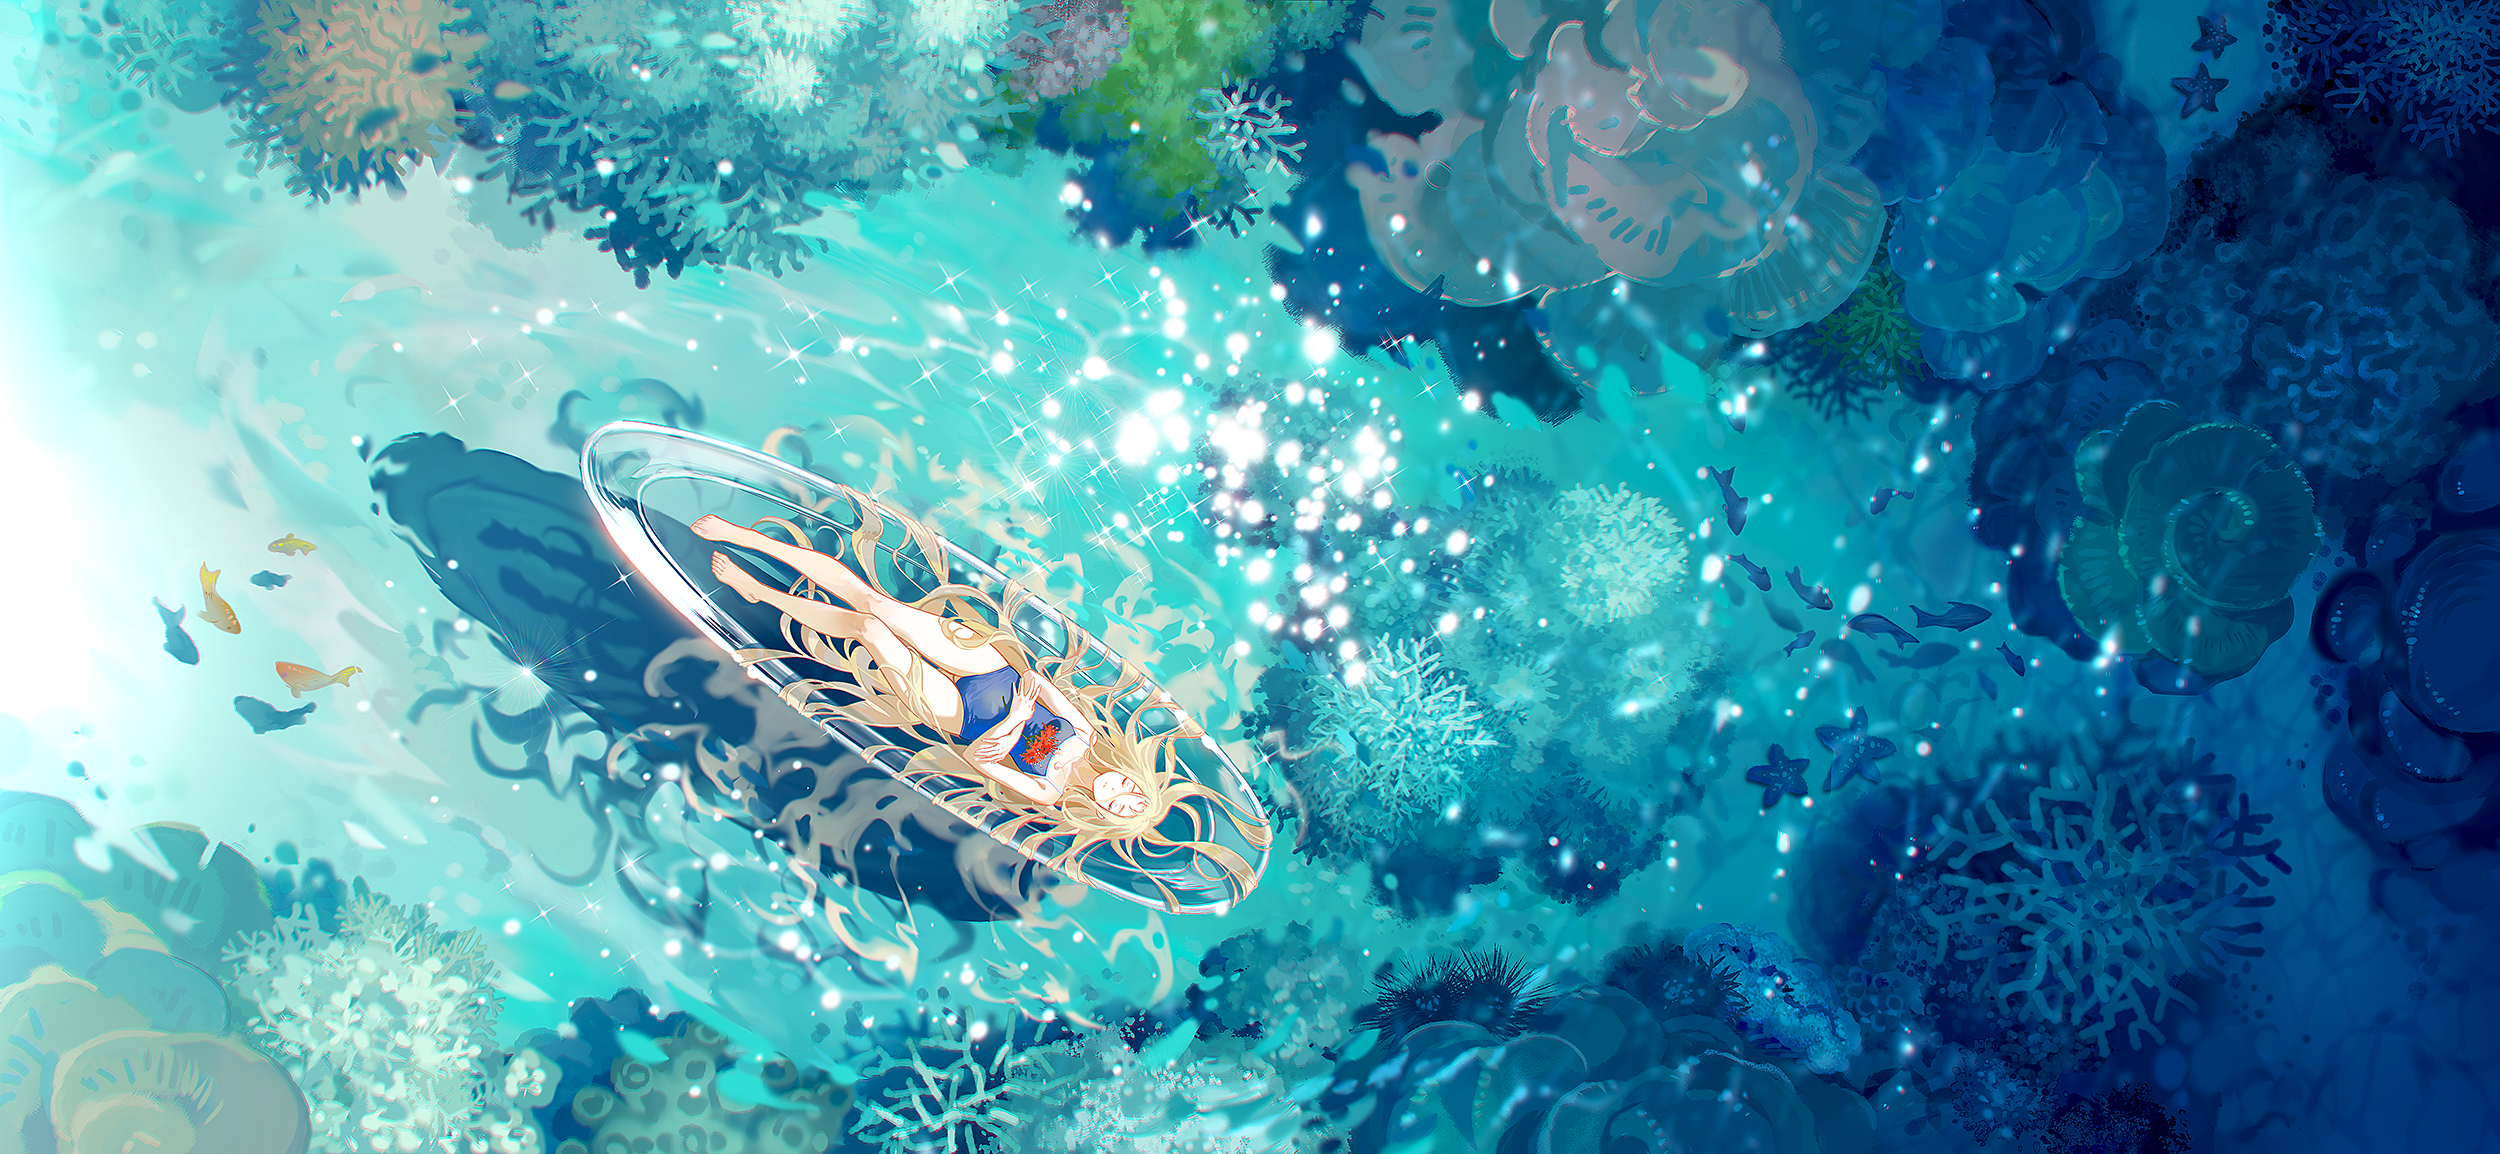 Anime Anime Girls Water Lying On Back Blonde Closed Eyes Coral Top View Fish Reflection 2500x1154